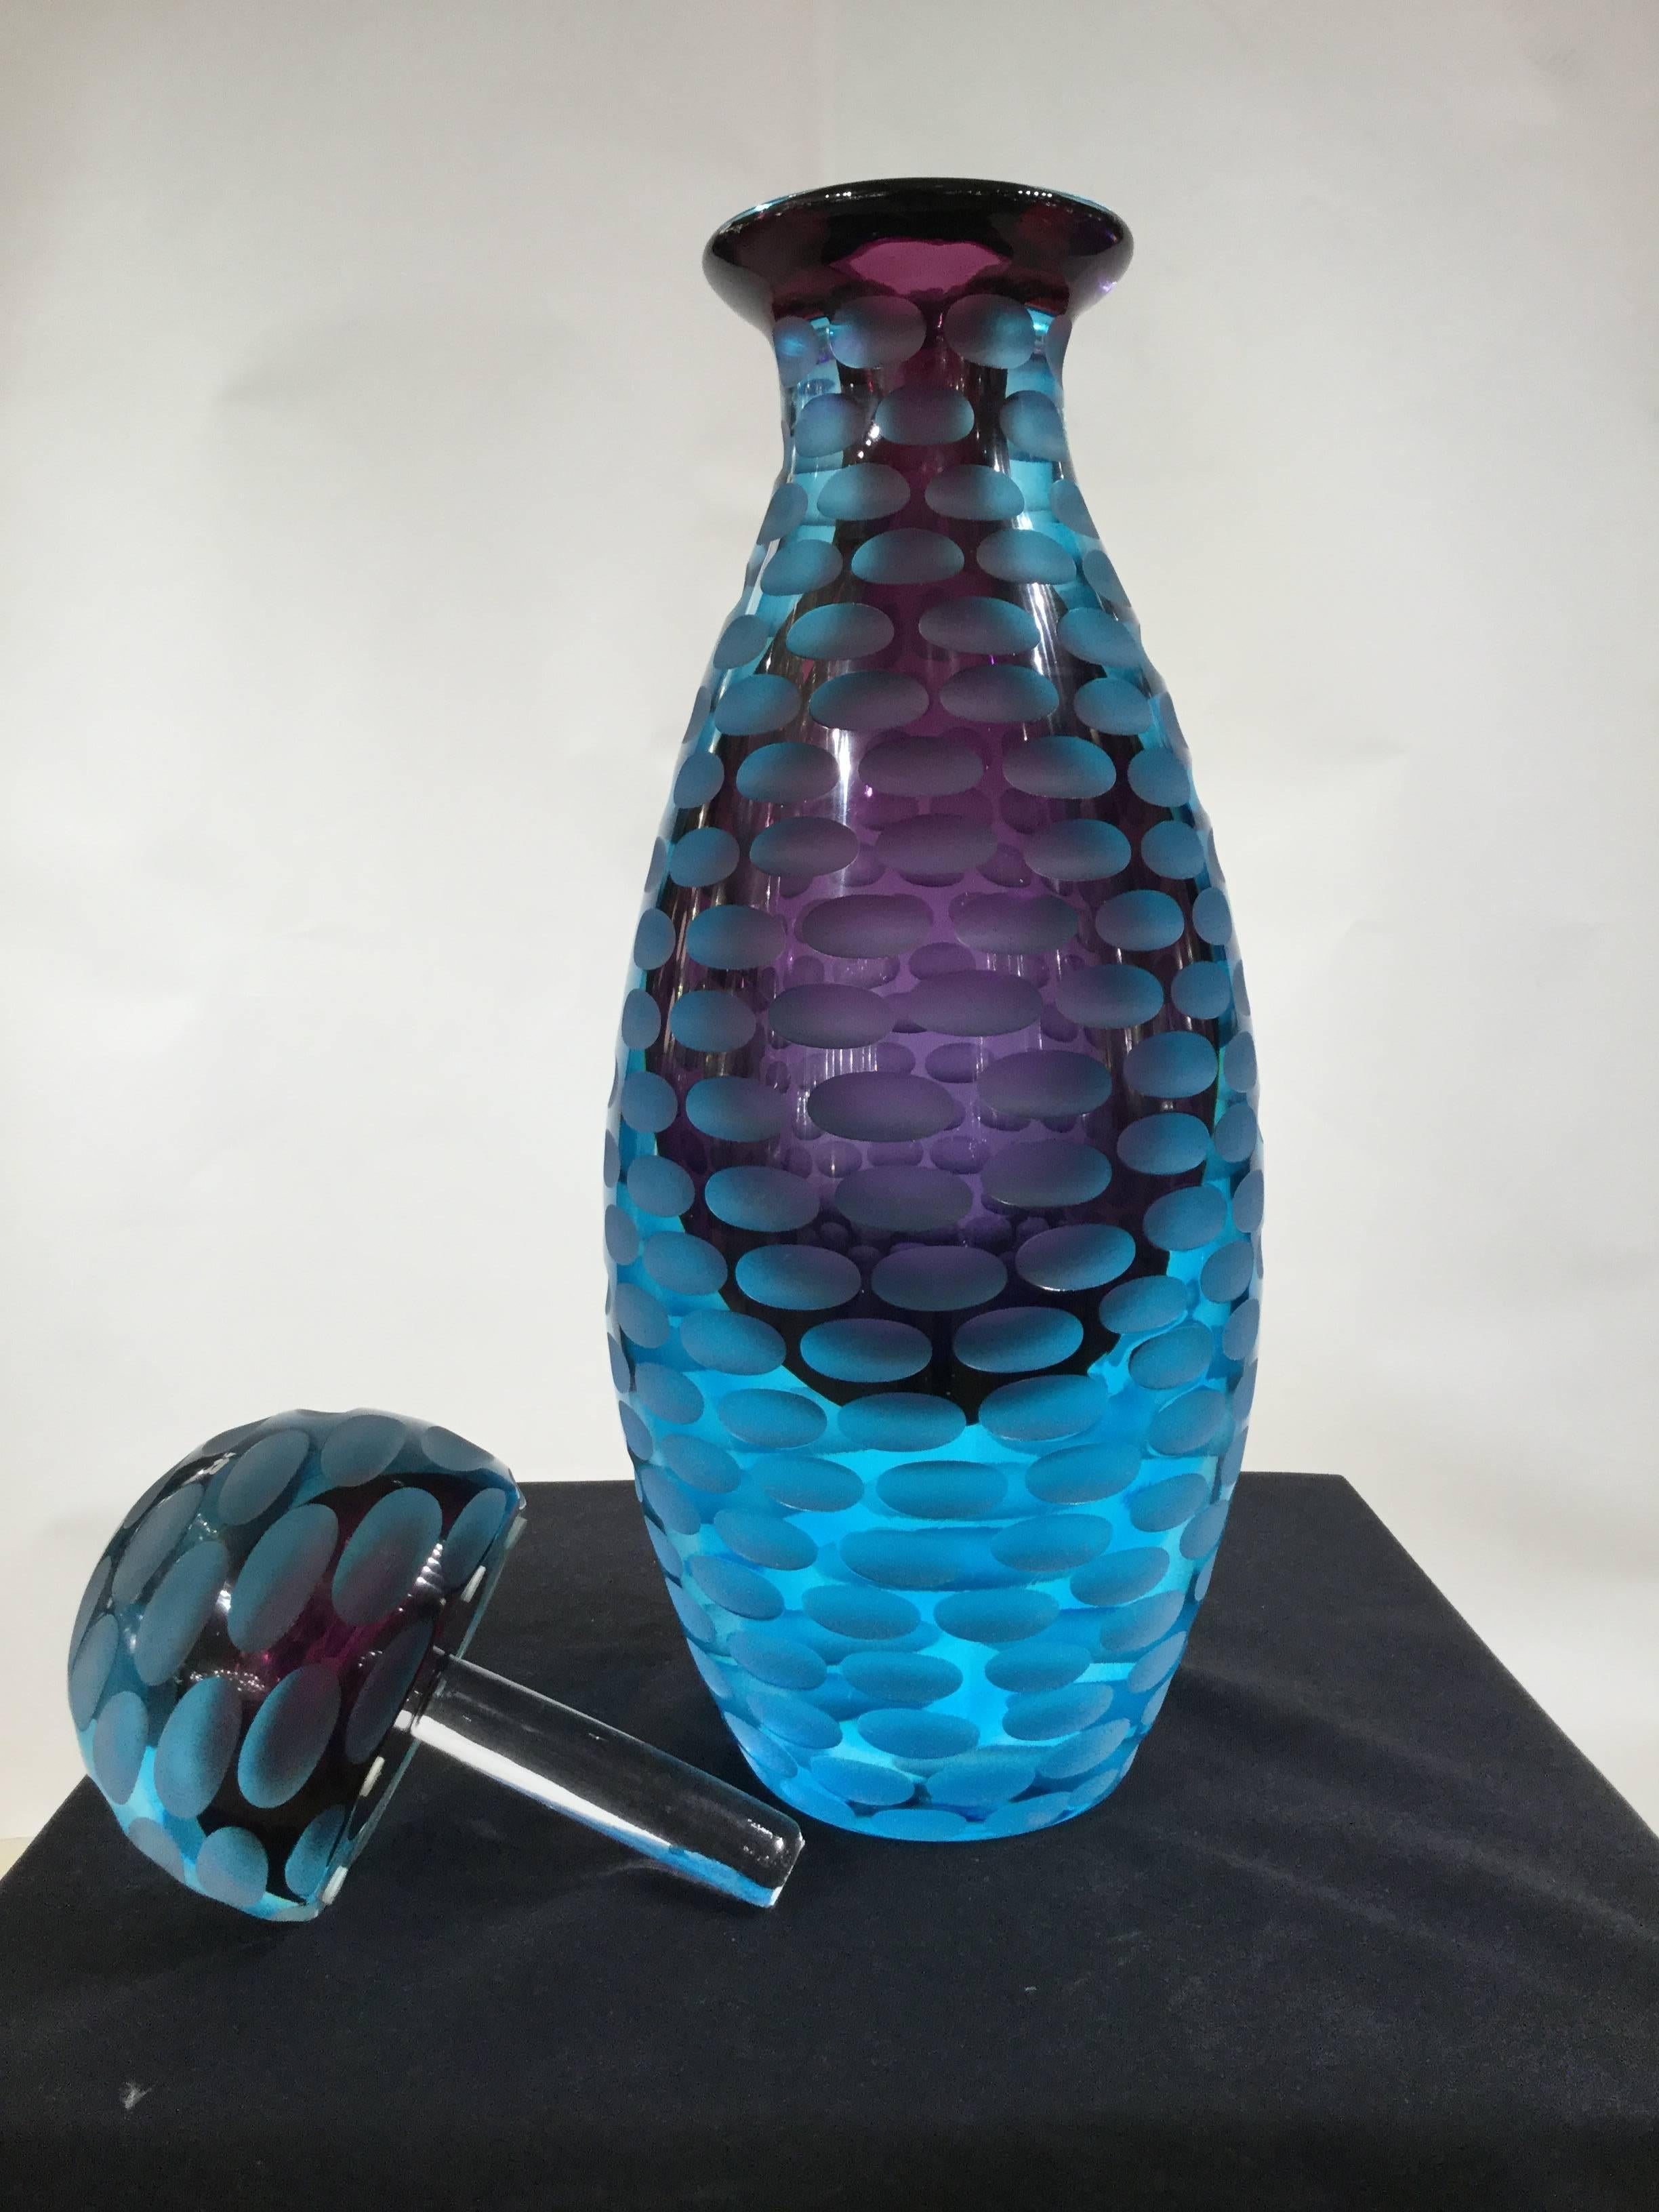 Amazing faceted purple/ and blue Murano glass Sommerso bottle
This hand blown glass bottle is made of purple glass submerged into blue glass. Designed with decorative faceted all around
